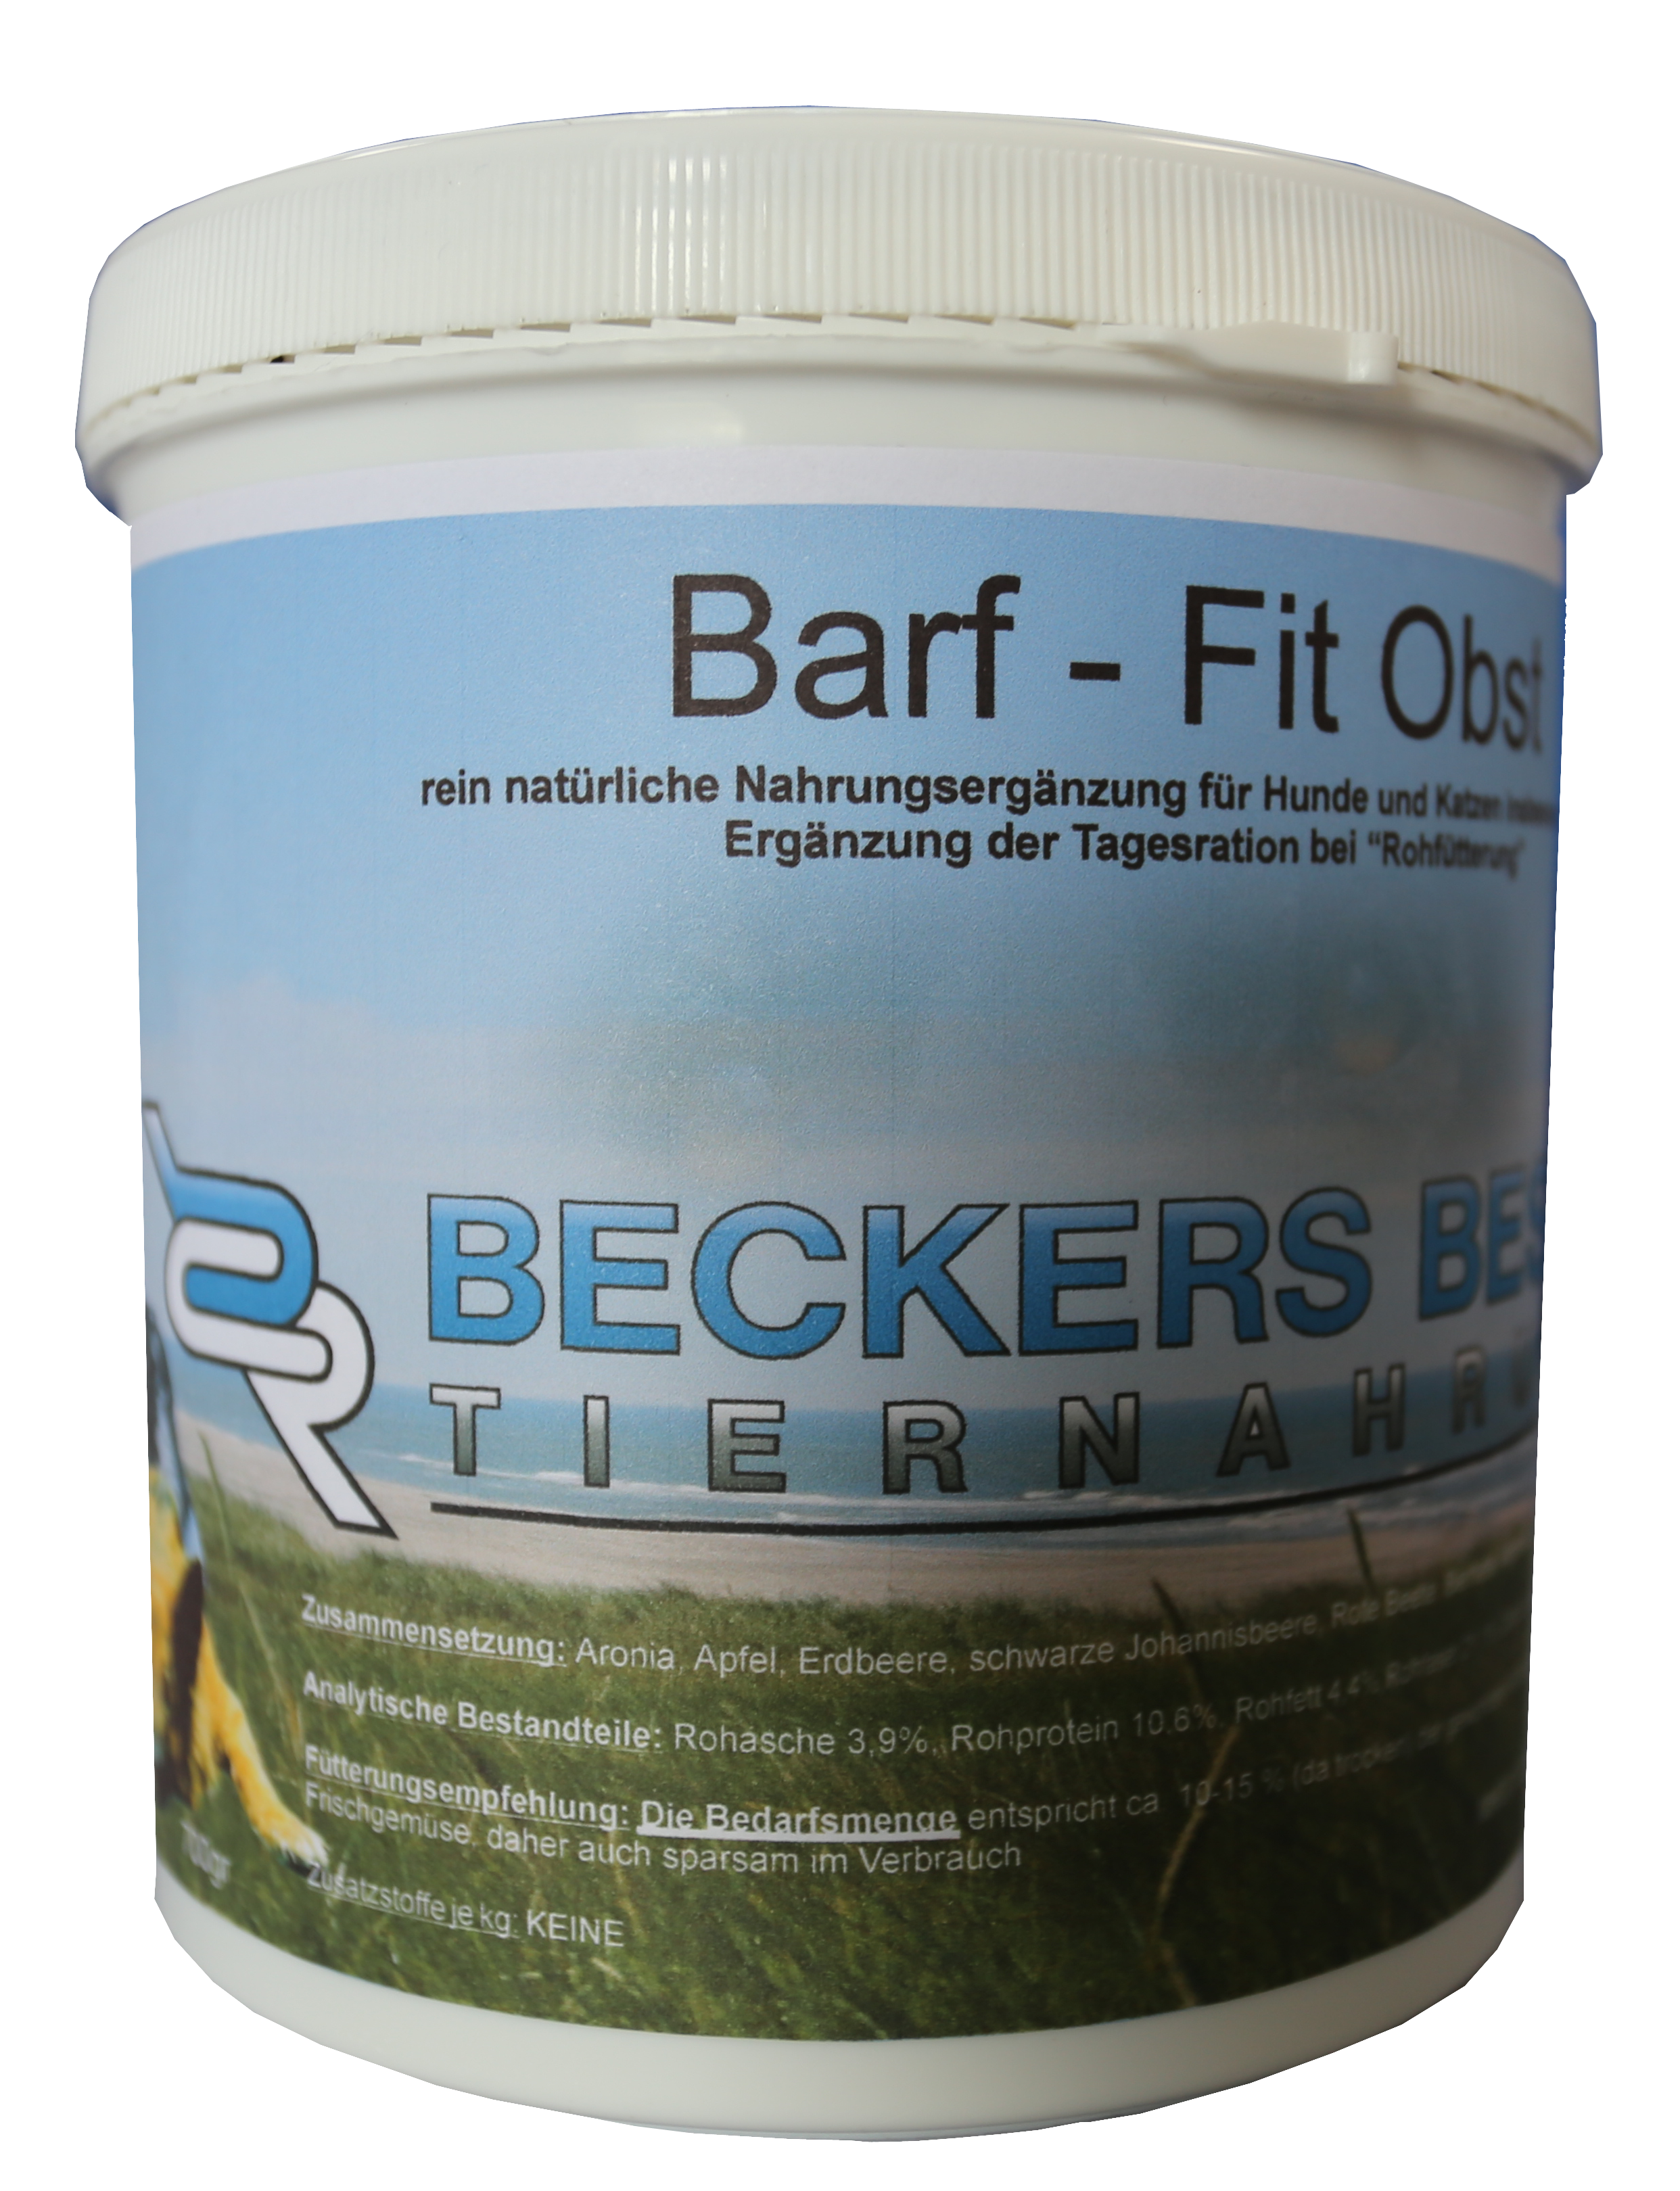 Beckers-Barf-Fit Obst 700g